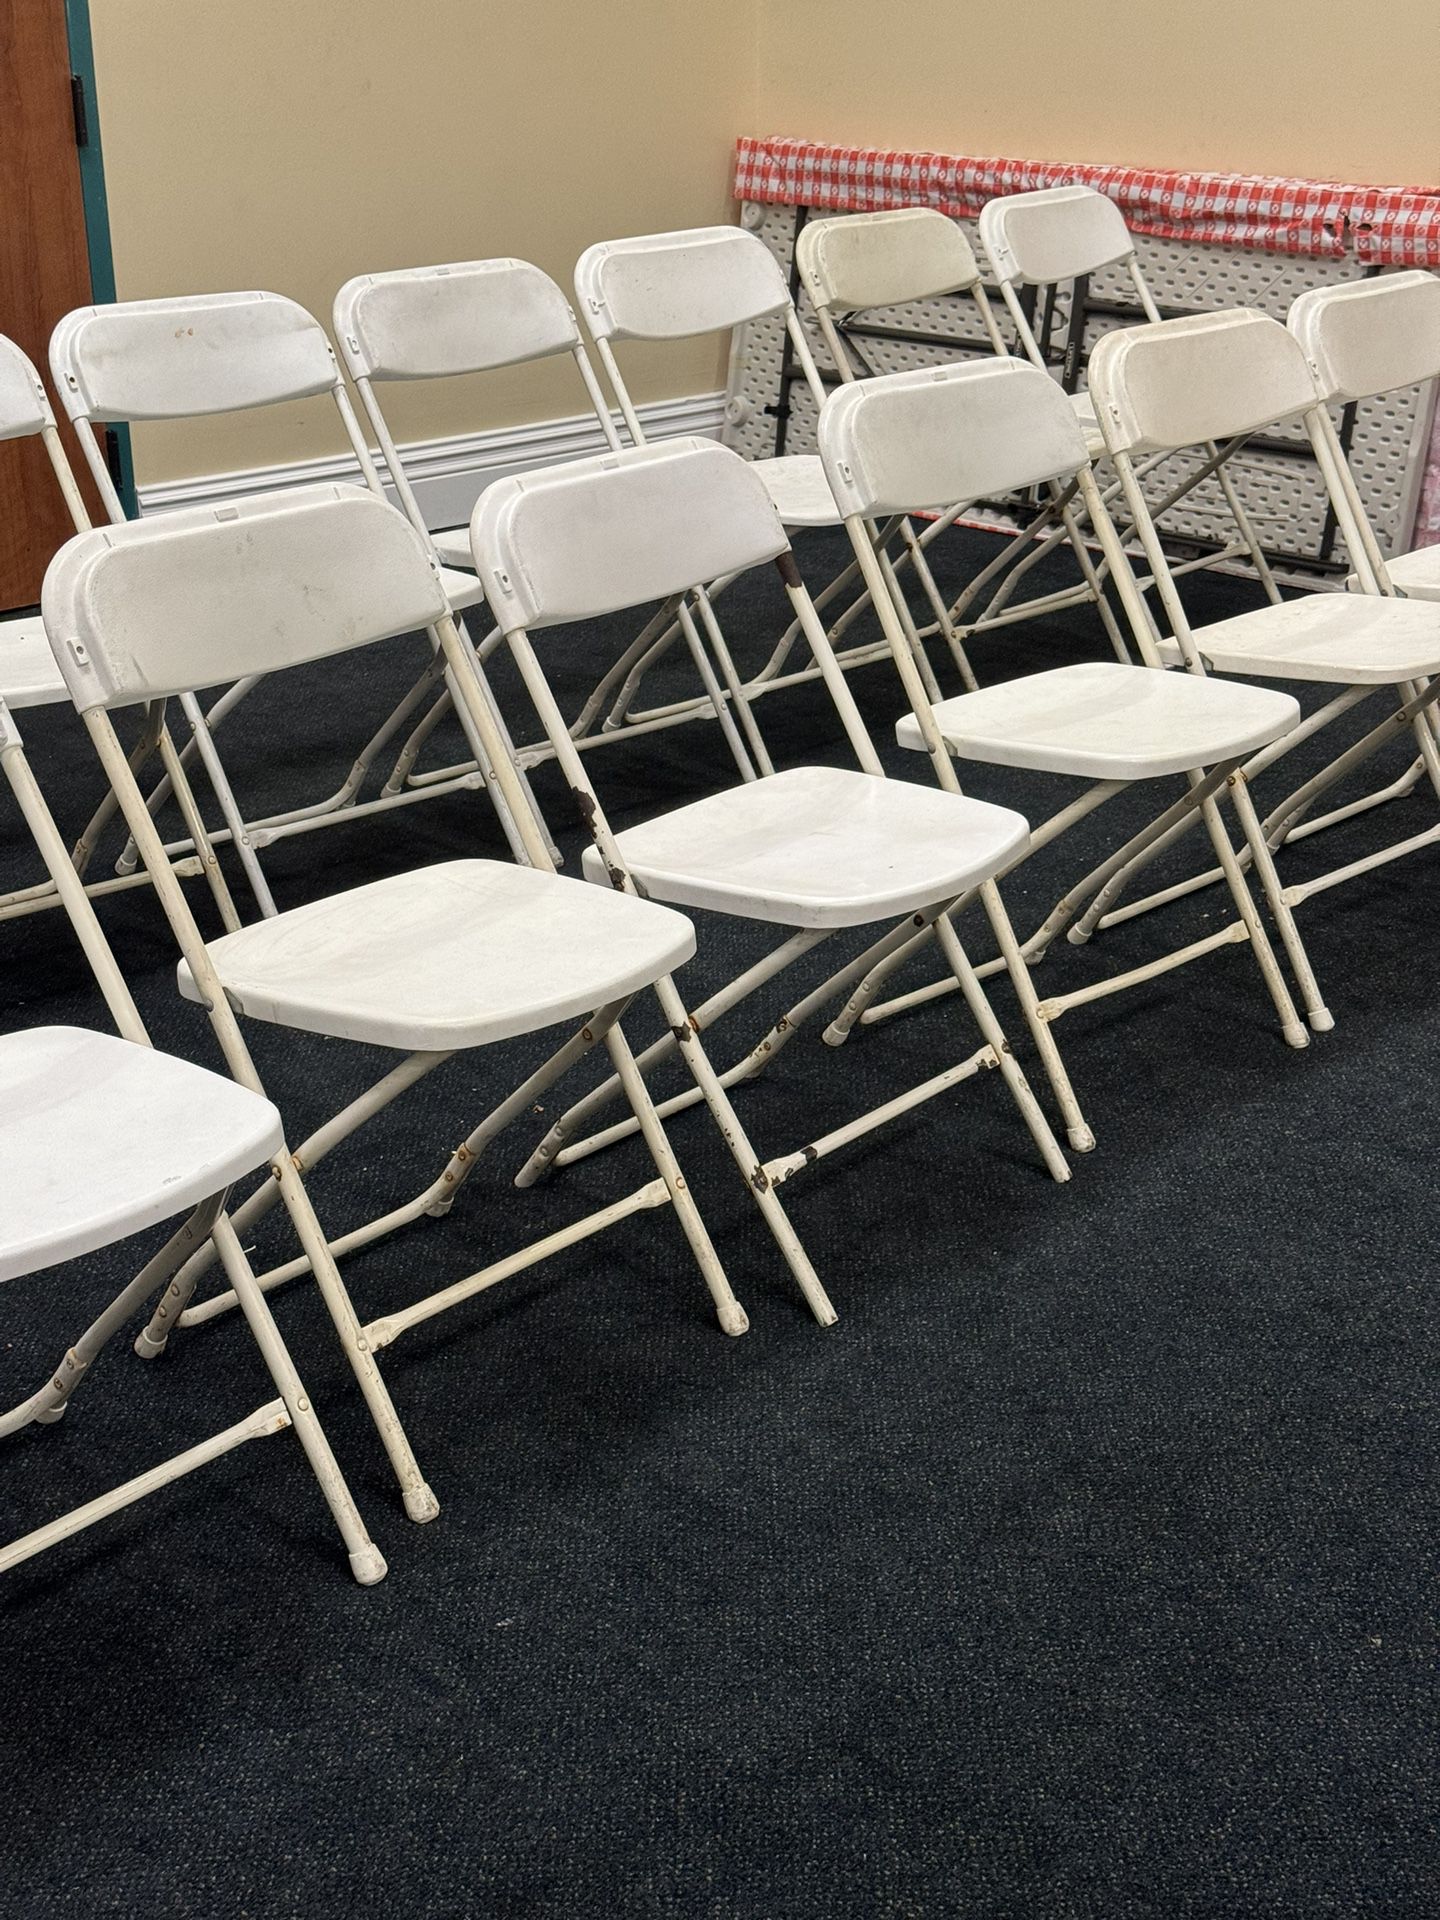 SET OF 10 NEW White Plastic Folding Chairs Frame Commercial High Capacity Event Chair lightweight Set for Office Wedding Party Picnic Kitchen Dining